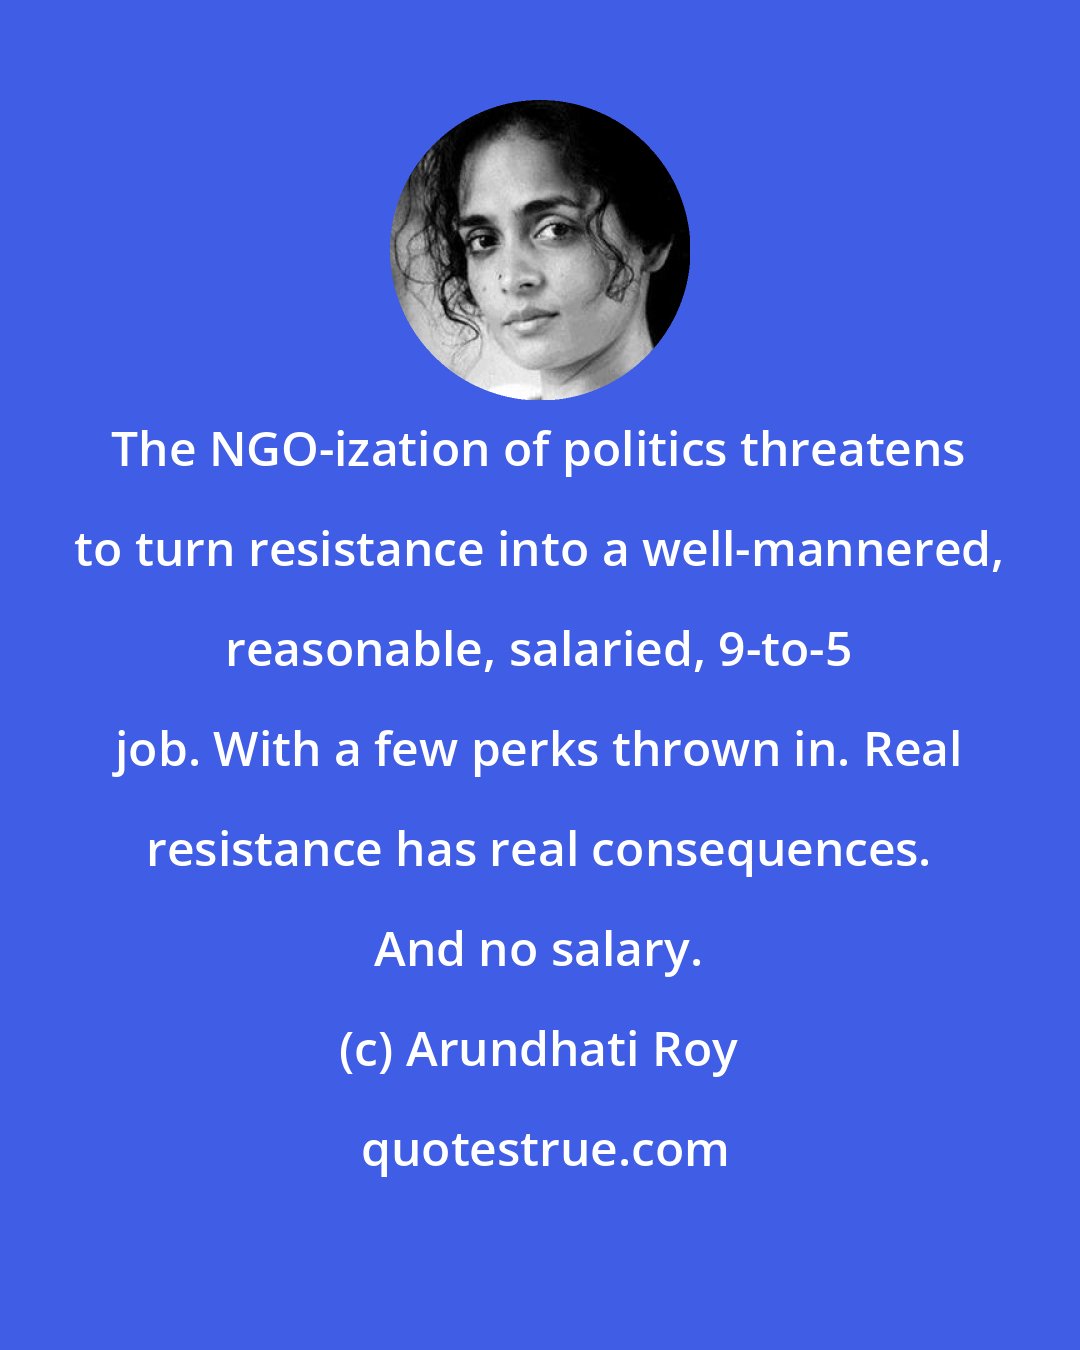 Arundhati Roy: The NGO-ization of politics threatens to turn resistance into a well-mannered, reasonable, salaried, 9-to-5 job. With a few perks thrown in. Real resistance has real consequences. And no salary.